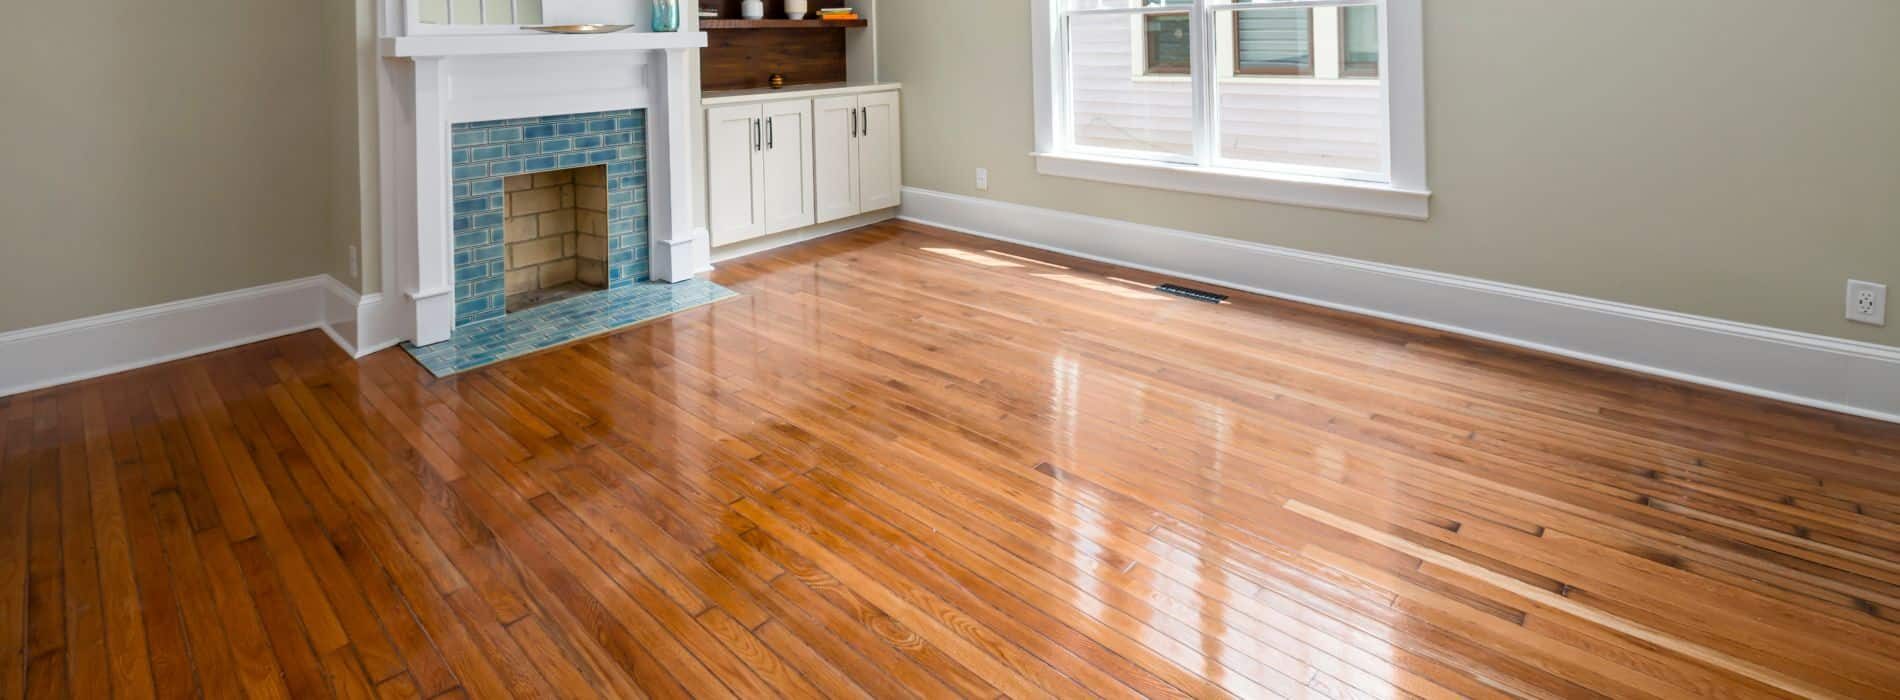 Expertly restored hardwood floor in Dagenham, RM10, by Mr Sander® with Bona 2.2K Frost whitewashing and Traffic HD 16% sheen matte lacquer ensure a durable, stunning finish. Long-lasting beauty captured in this expert restoration.